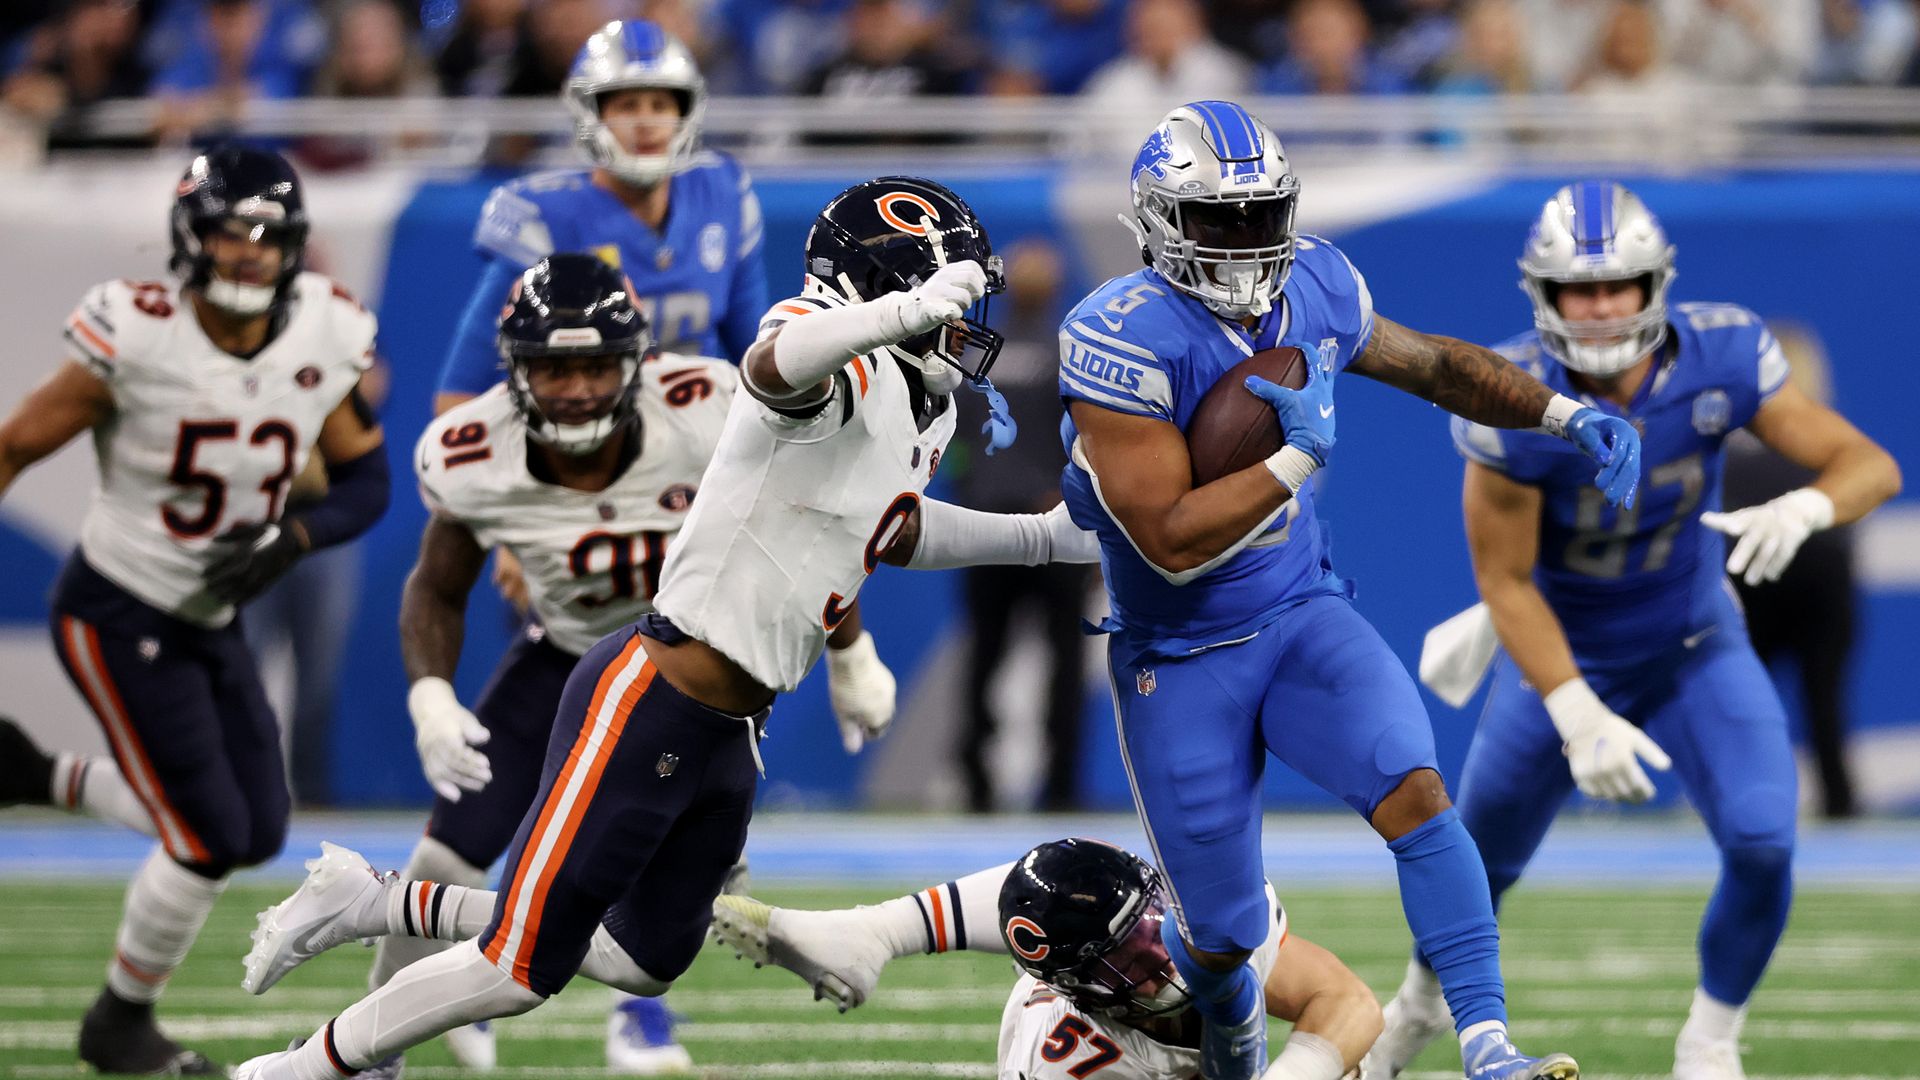 Lions RB David Montgomery runs with the ball against the Bears at Ford Field yesterday